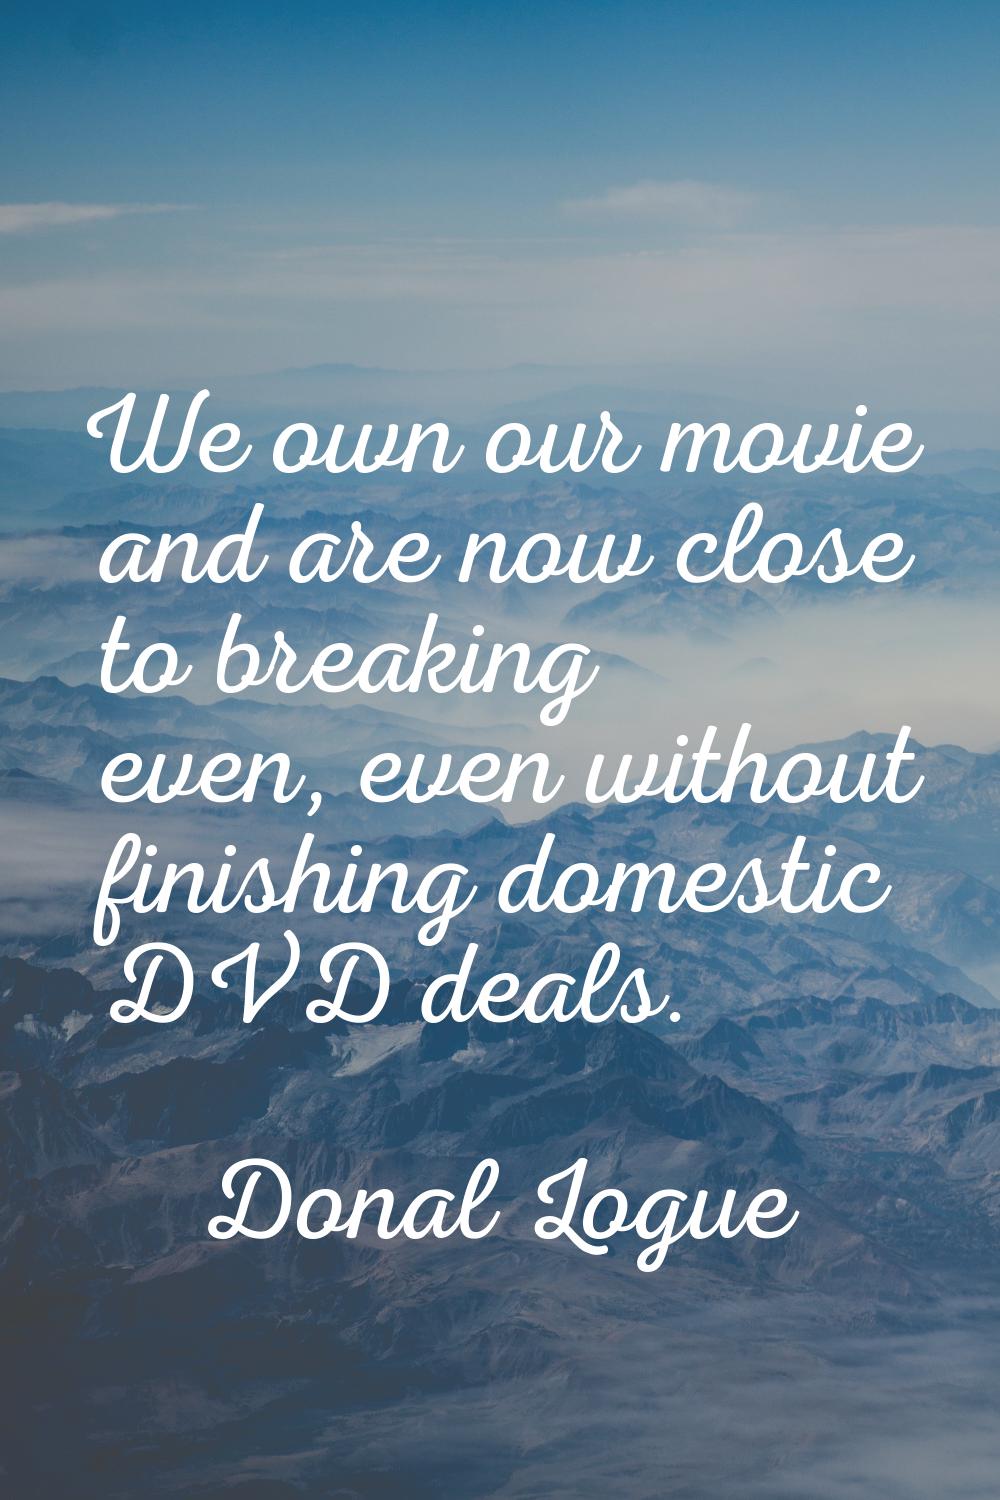 We own our movie and are now close to breaking even, even without finishing domestic DVD deals.